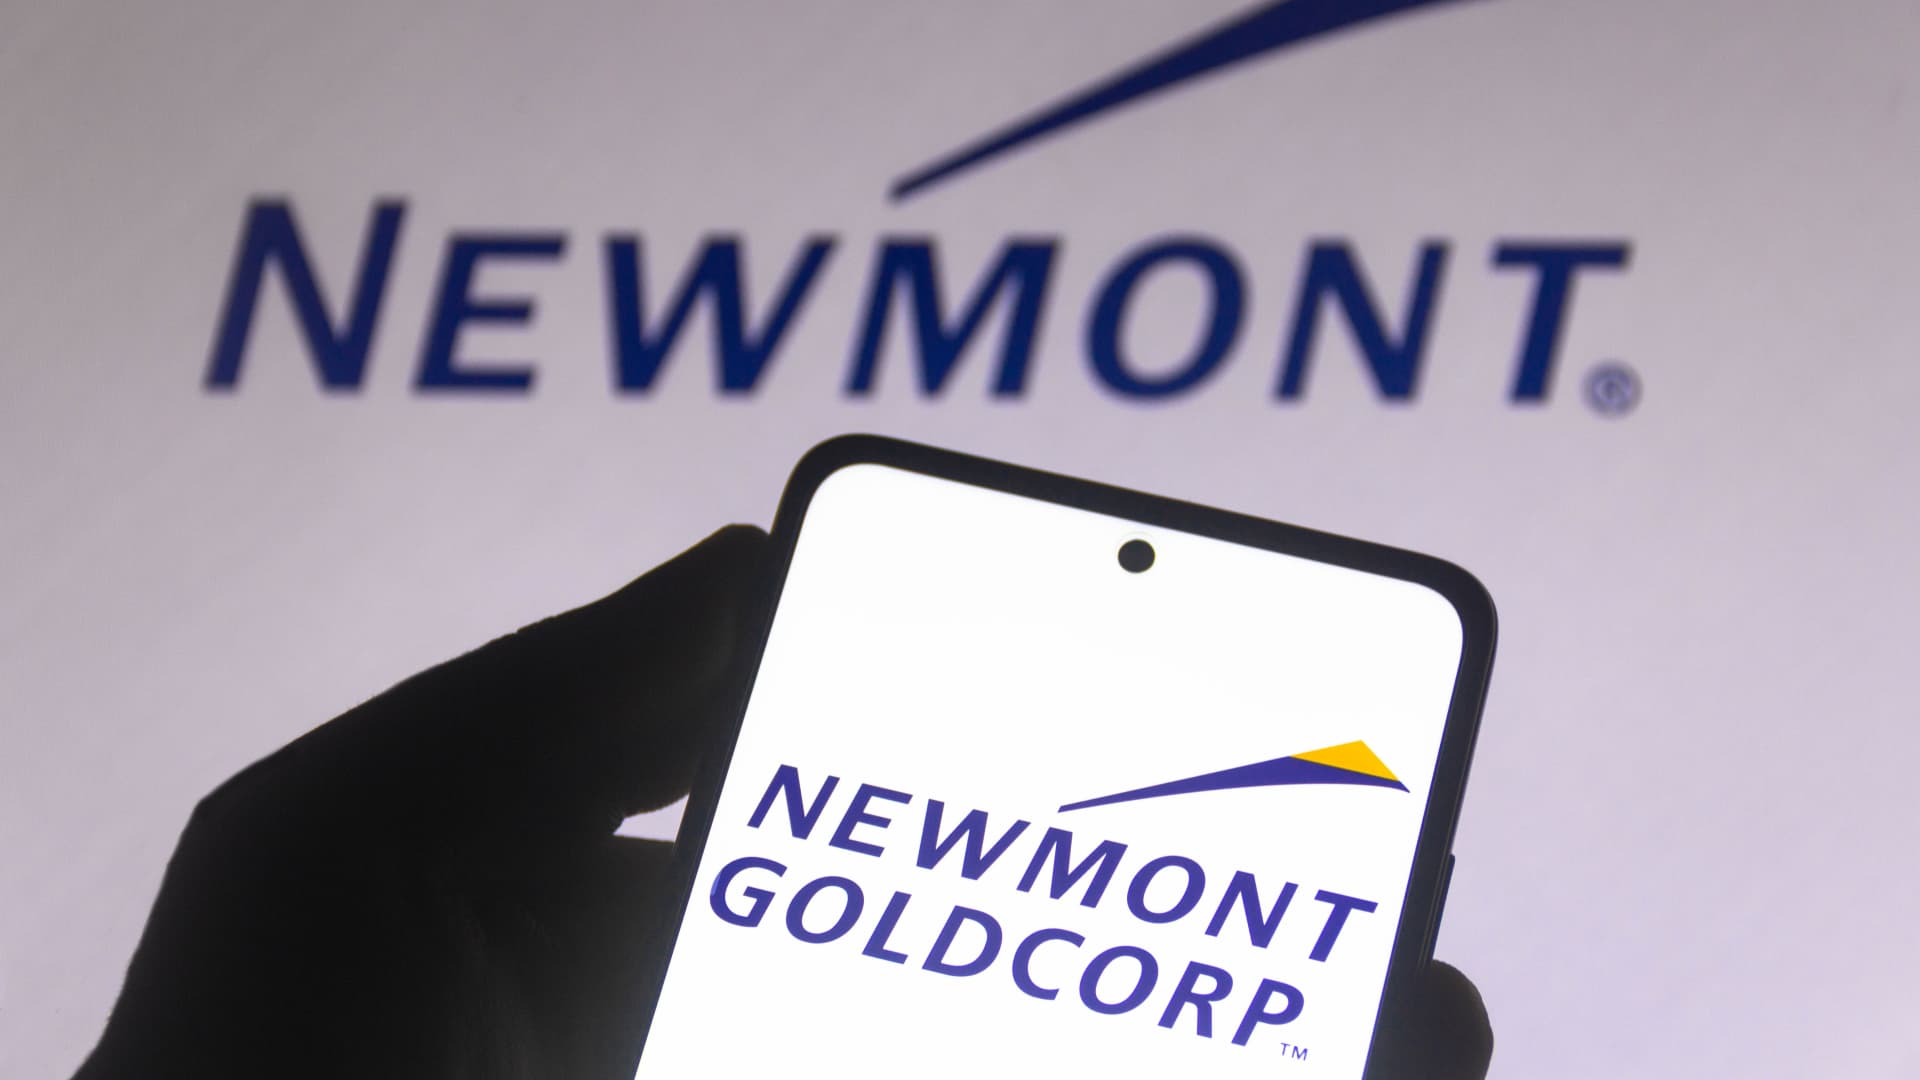 Newmont can jump 20% as gold miner’s new projects drive growth, Goldman Sachs says